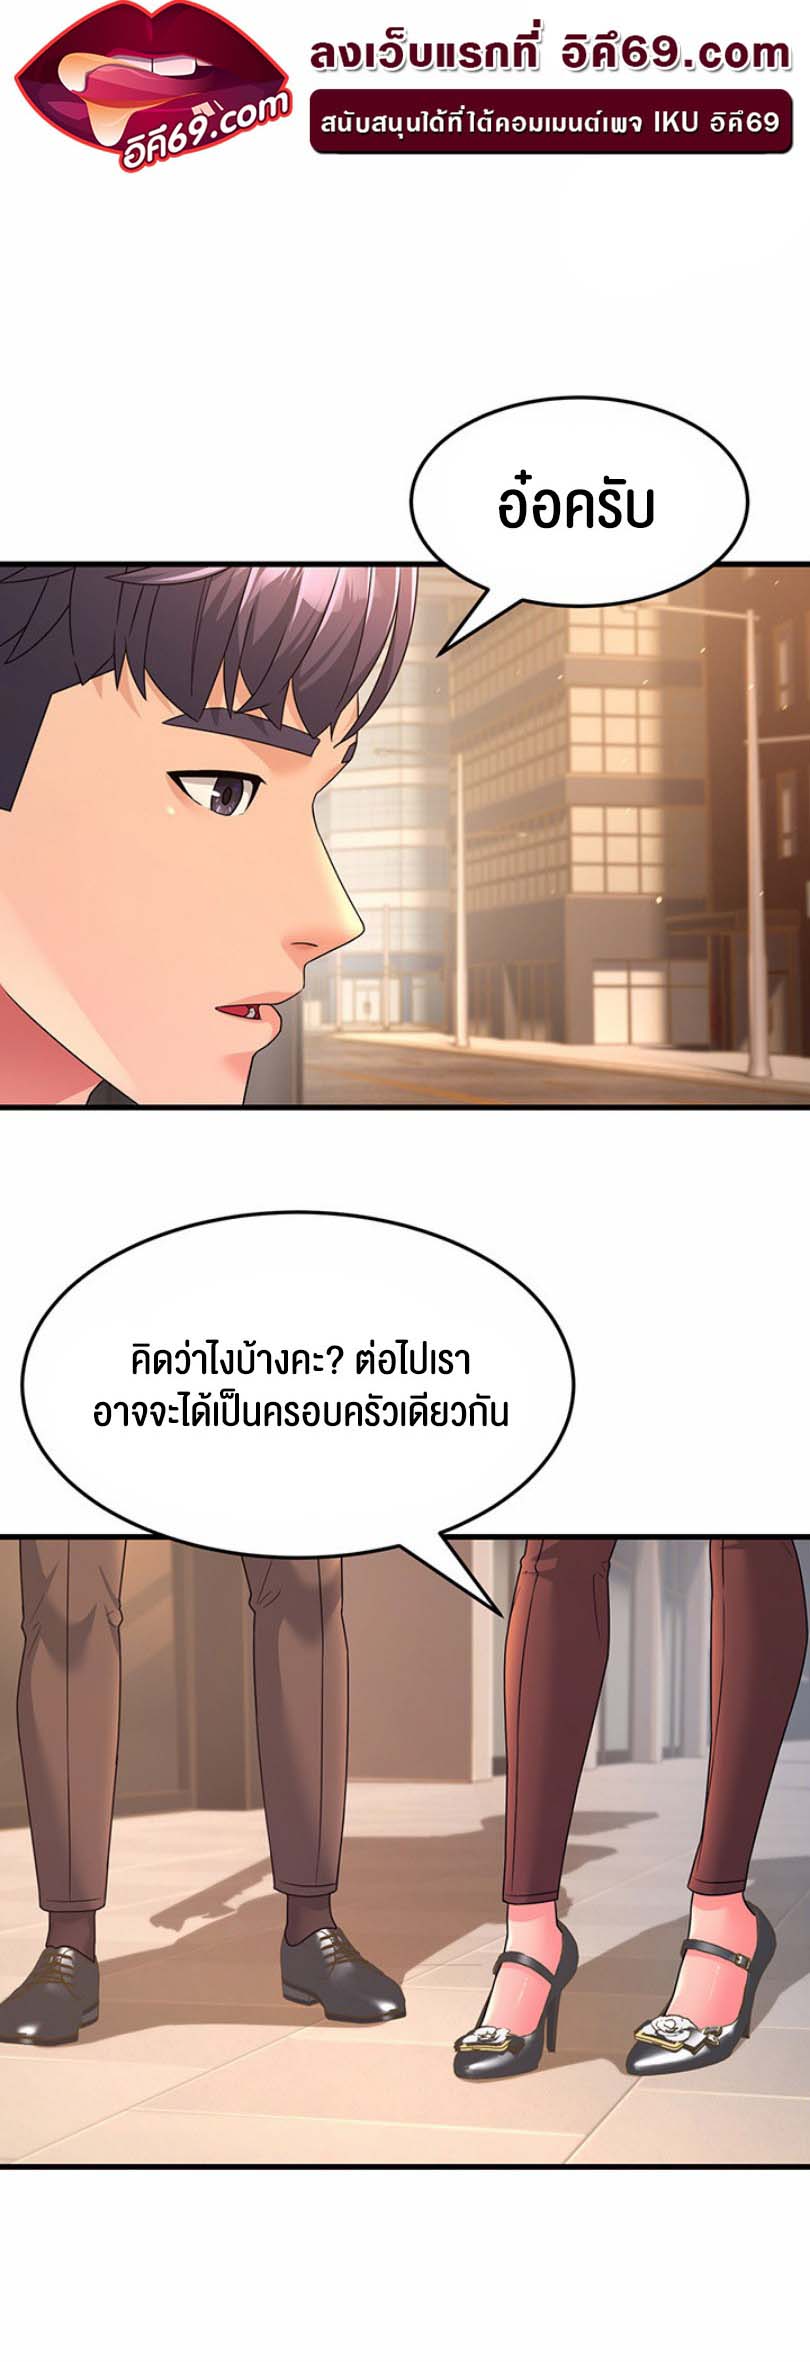 à¸­à¹ˆà¸²à¸™à¹‚à¸”à¸ˆà¸´à¸™ à¹€à¸£à¸·à¹ˆà¸­à¸‡ Mother in Law Bends To My Will 9 07